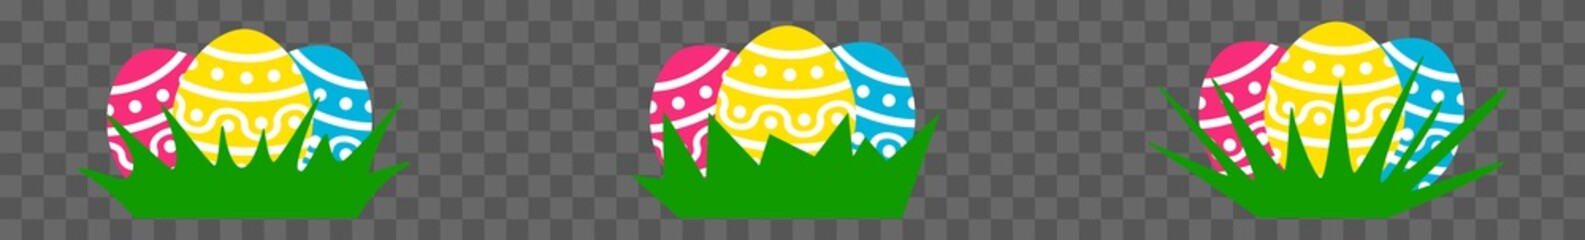 Easter Basket Icon Color | Painted Easter Eggs Illustration | Happy Easter Egg Hunt Symbol | Holiday Logo | April Spring Sign | Isolated | Variations